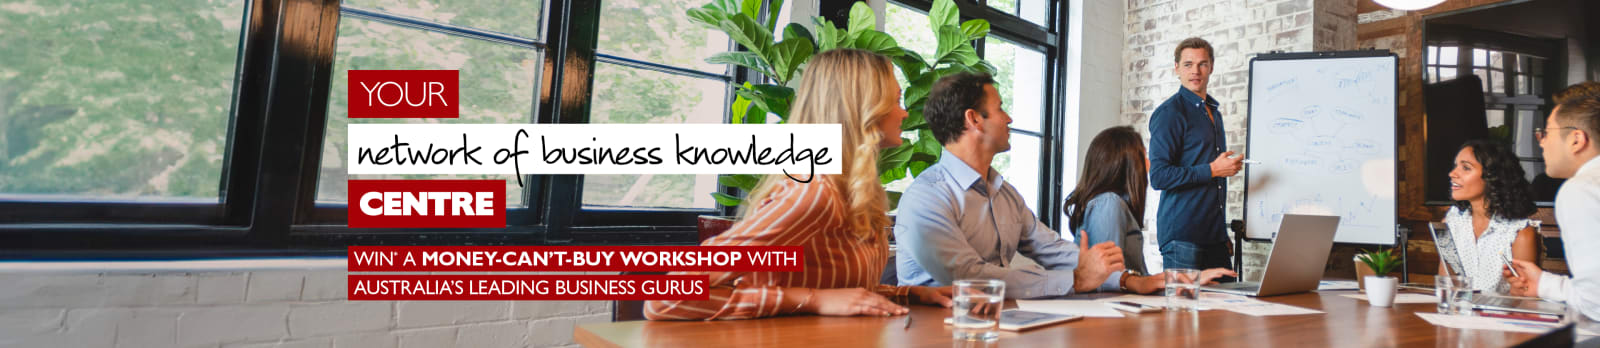 Your network of business knowledge centre - win a money-can't-buy workshop with Australia's leading business gurus. Team of businessmen and businesswomen around a table